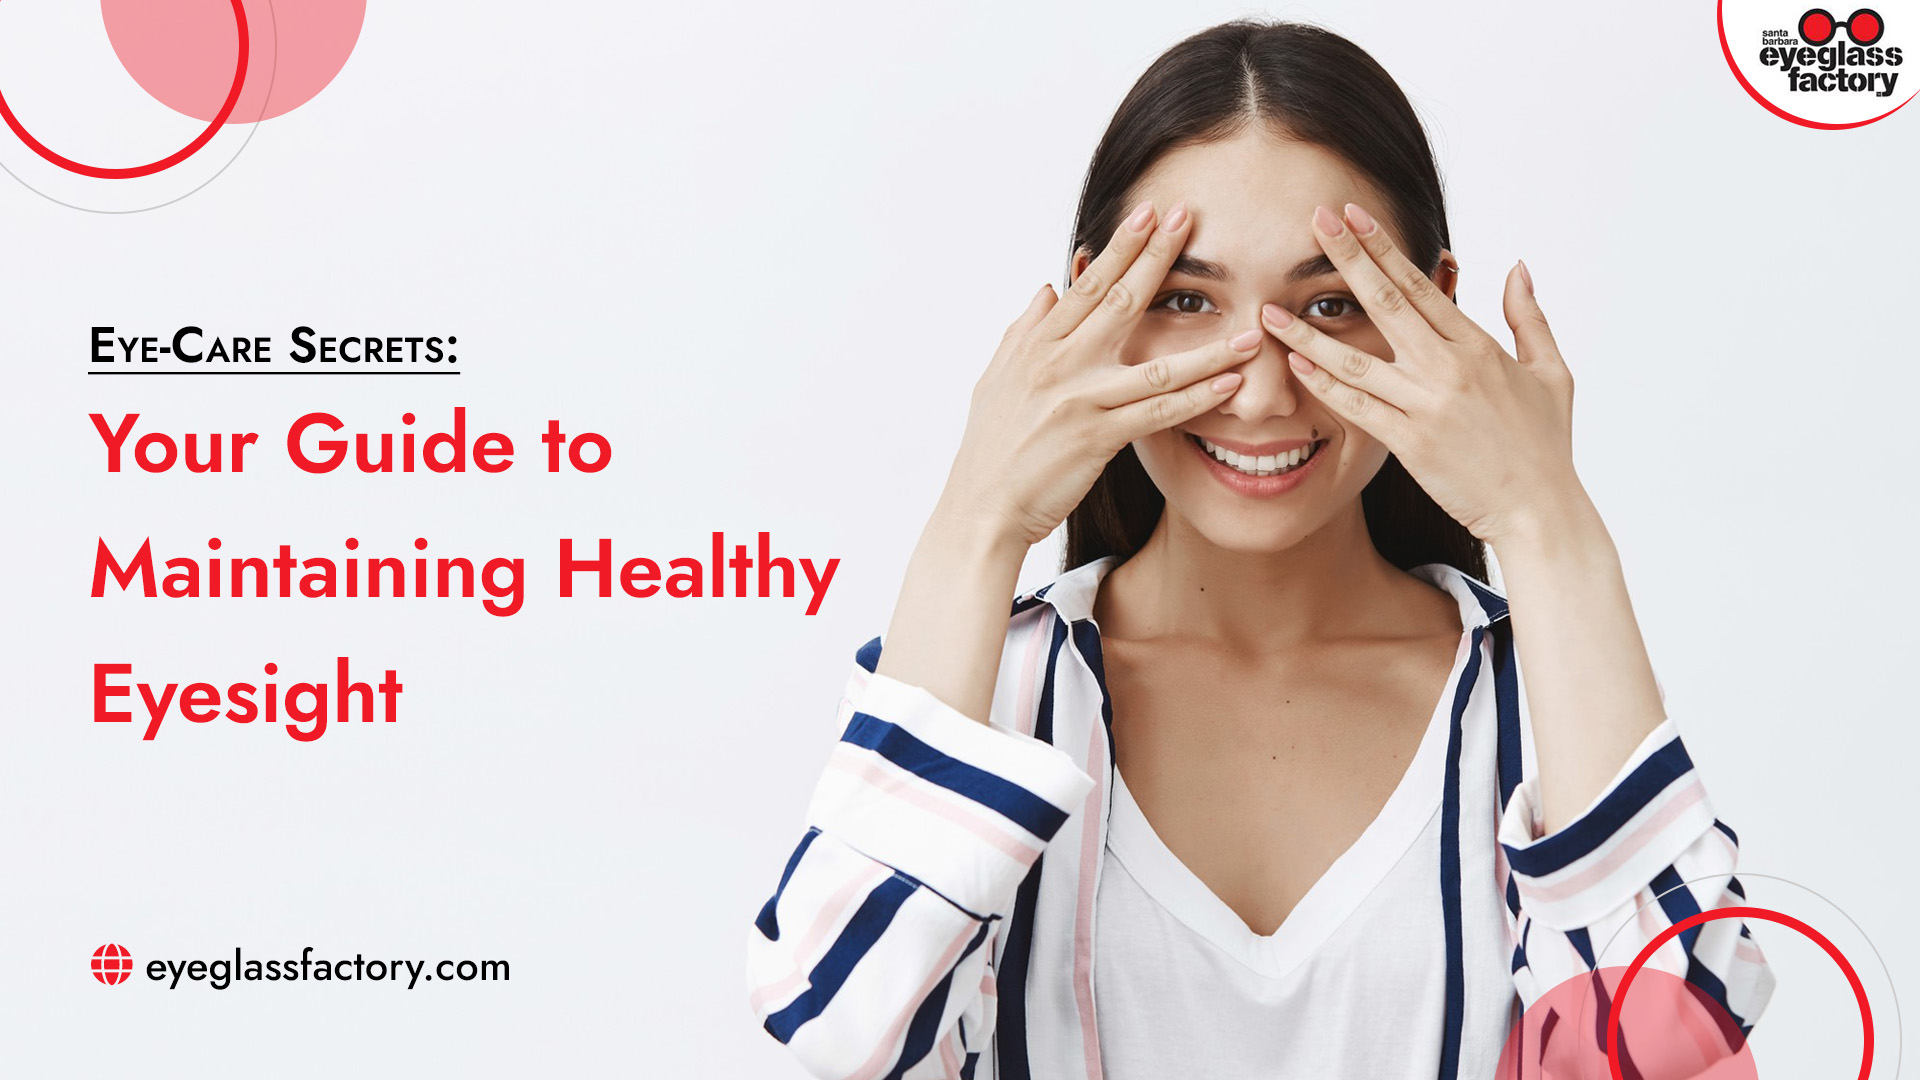 Your Guide to Maintaining Healthy Eyesight